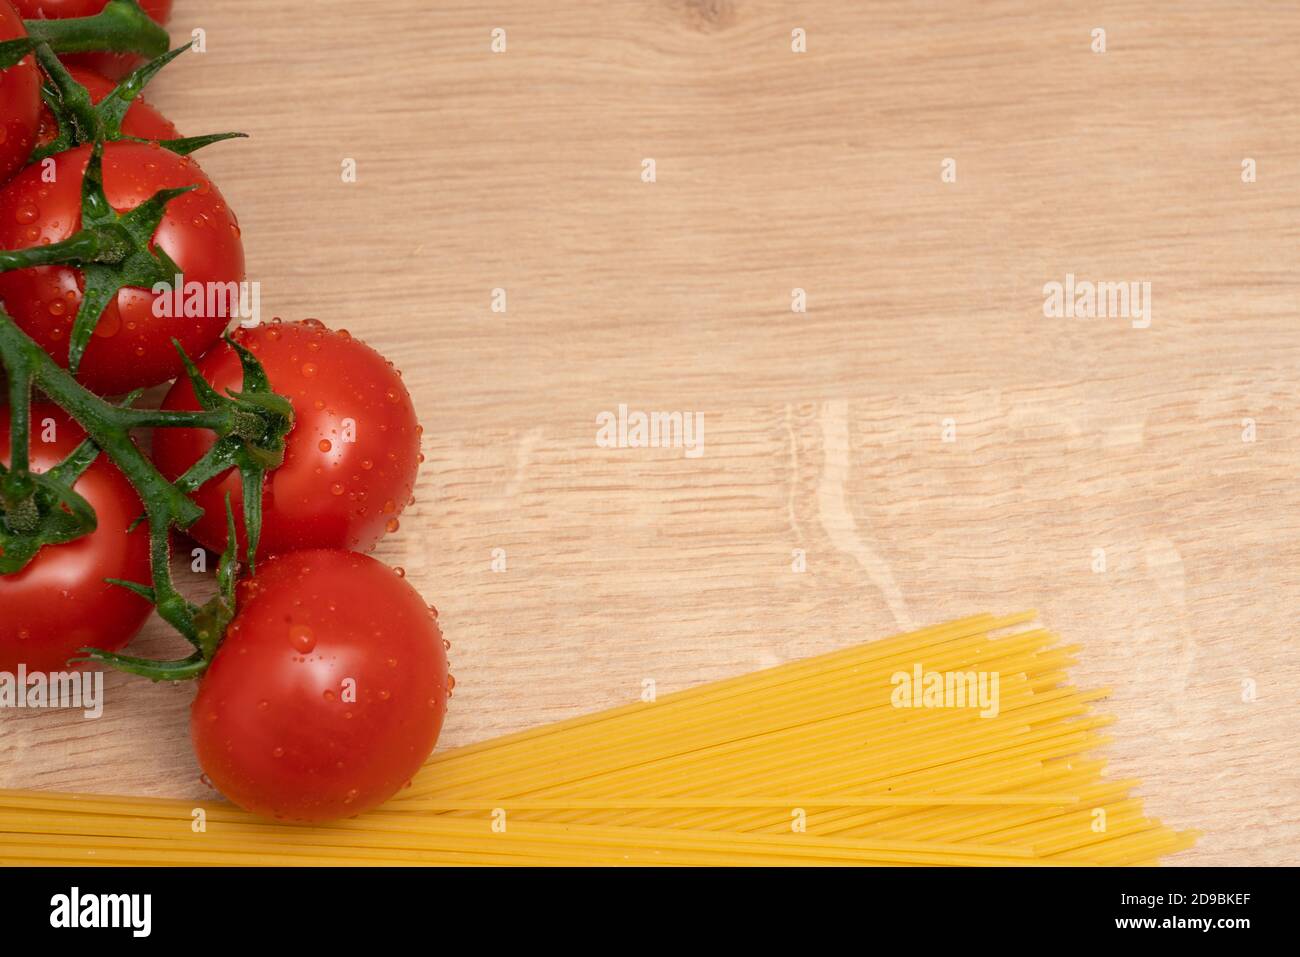 Italian pasta spaghetti and juicy organic tomatoes close-up with blank copyspace for advertising text on cutting board as fresh cooking concept Stock Photo